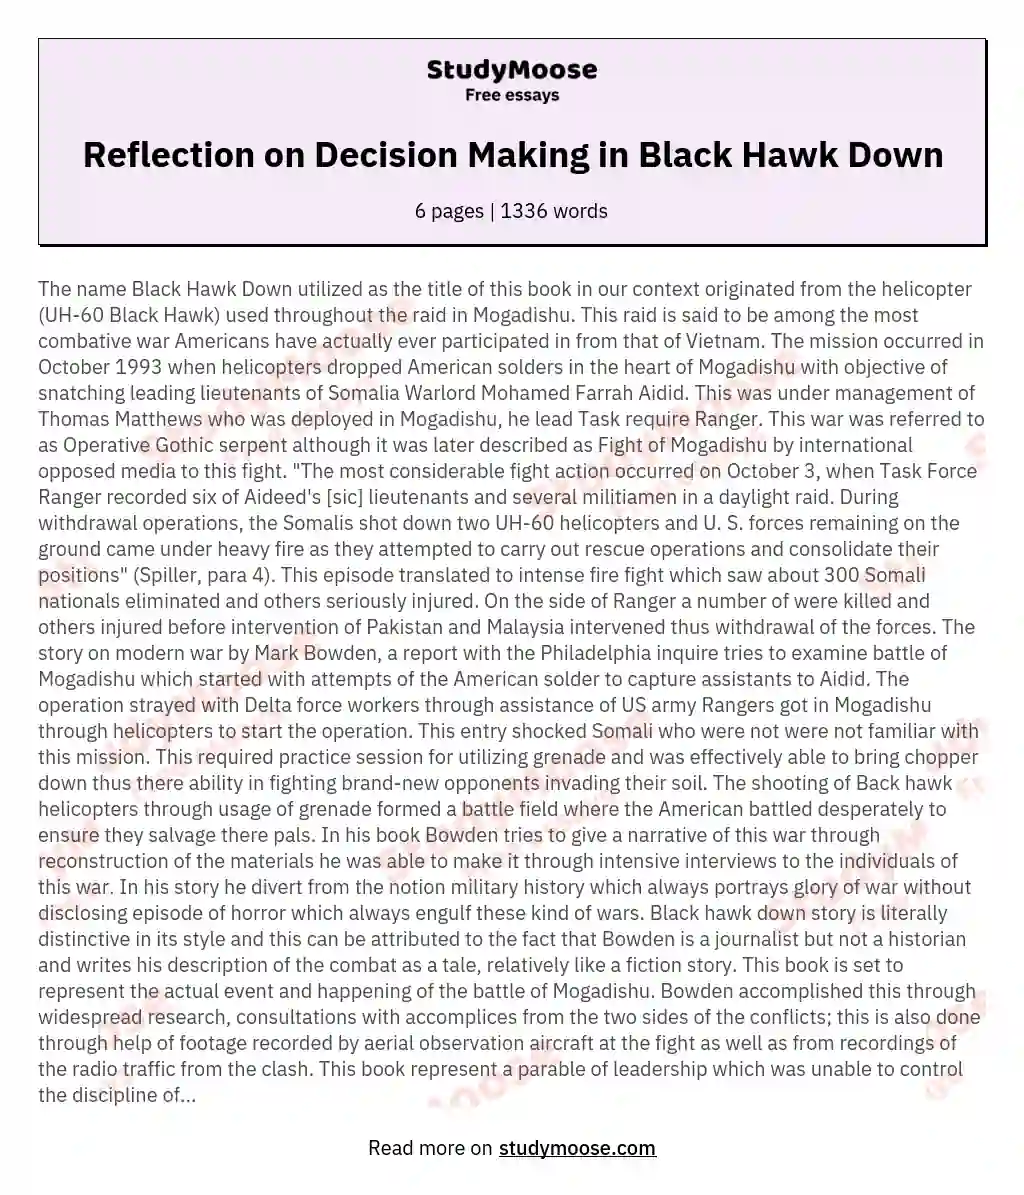 Reflection on Decision Making in Black Hawk Down essay